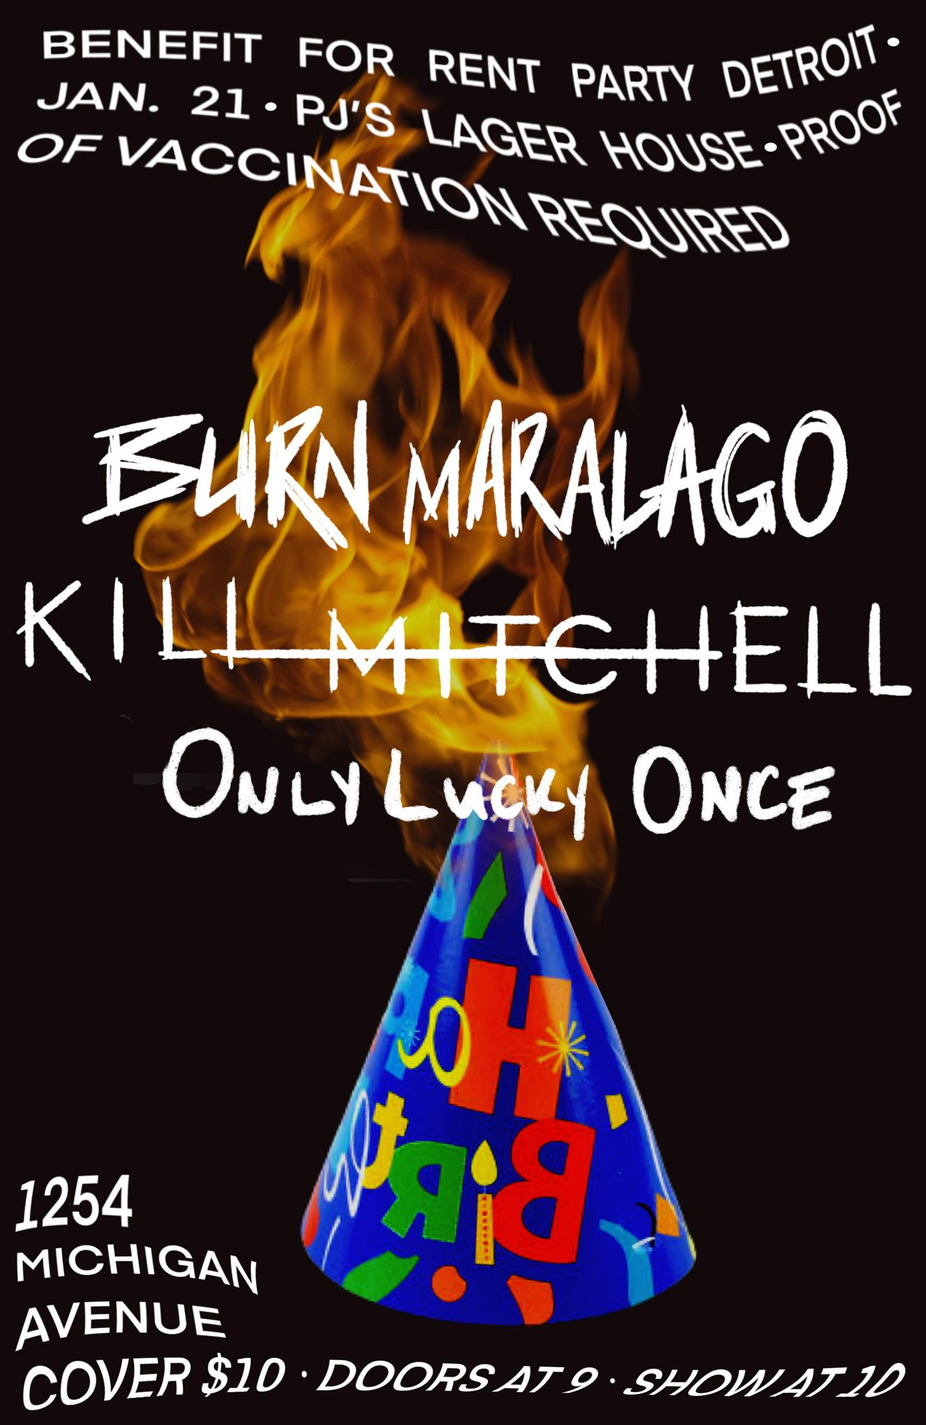 Kill Mitchell, Burn Maralago, Only Lucky Once event photo